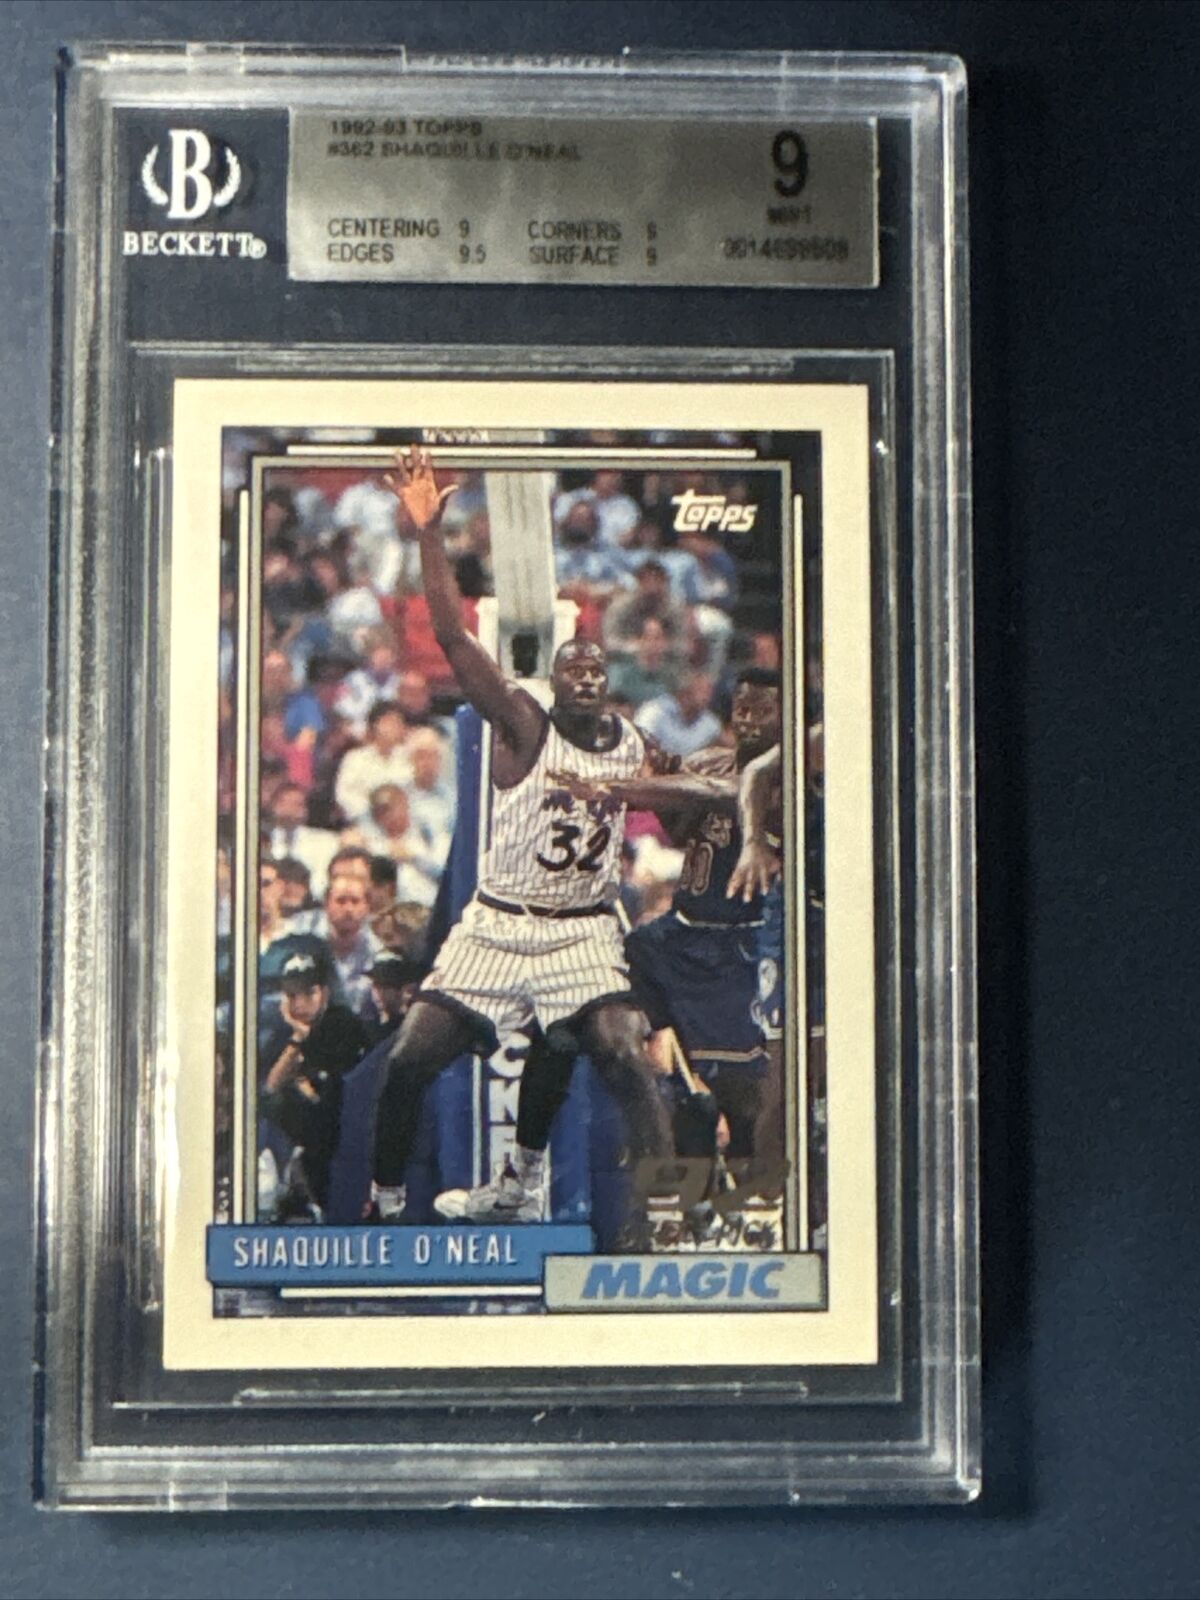 1992-93 Topps Shaquille O’Neal #362 Rookie W/ Sub Grades BGS 9 HOF Magic Lakers